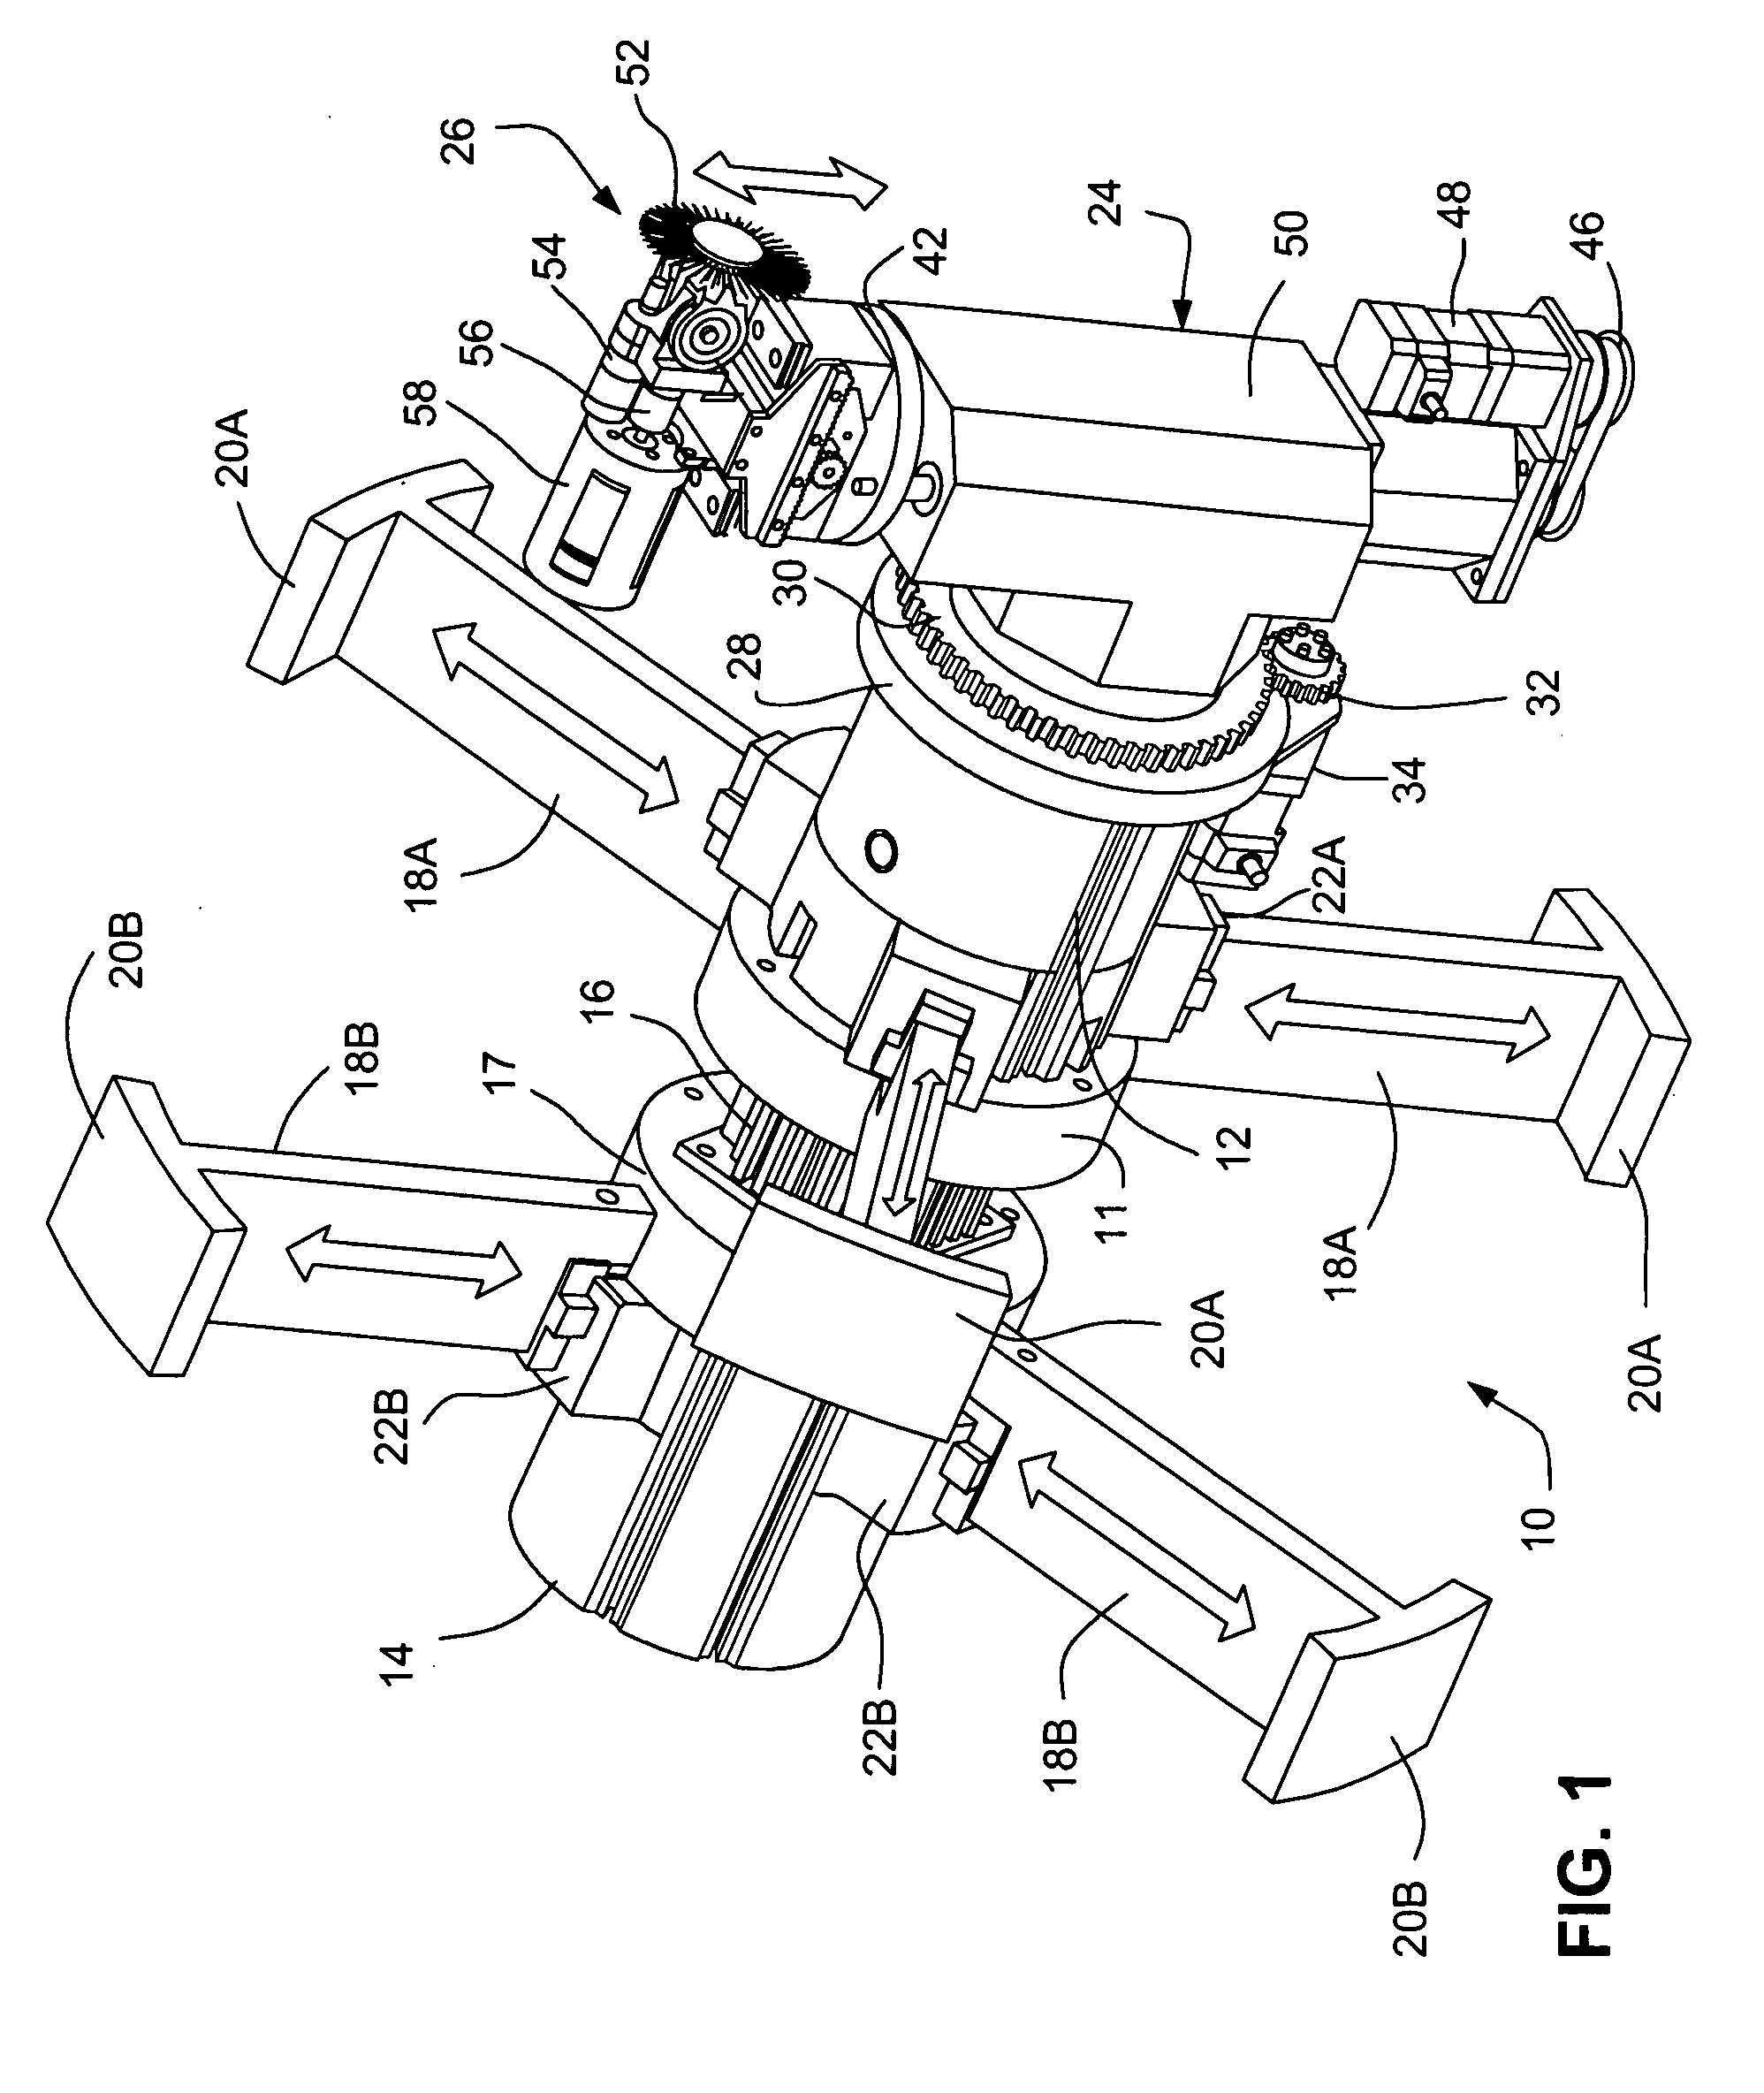 Method and apparatus for remotely inspecting and/or treating welds, pipes, vessels and/or other components used in reactor coolant systems or other process applications